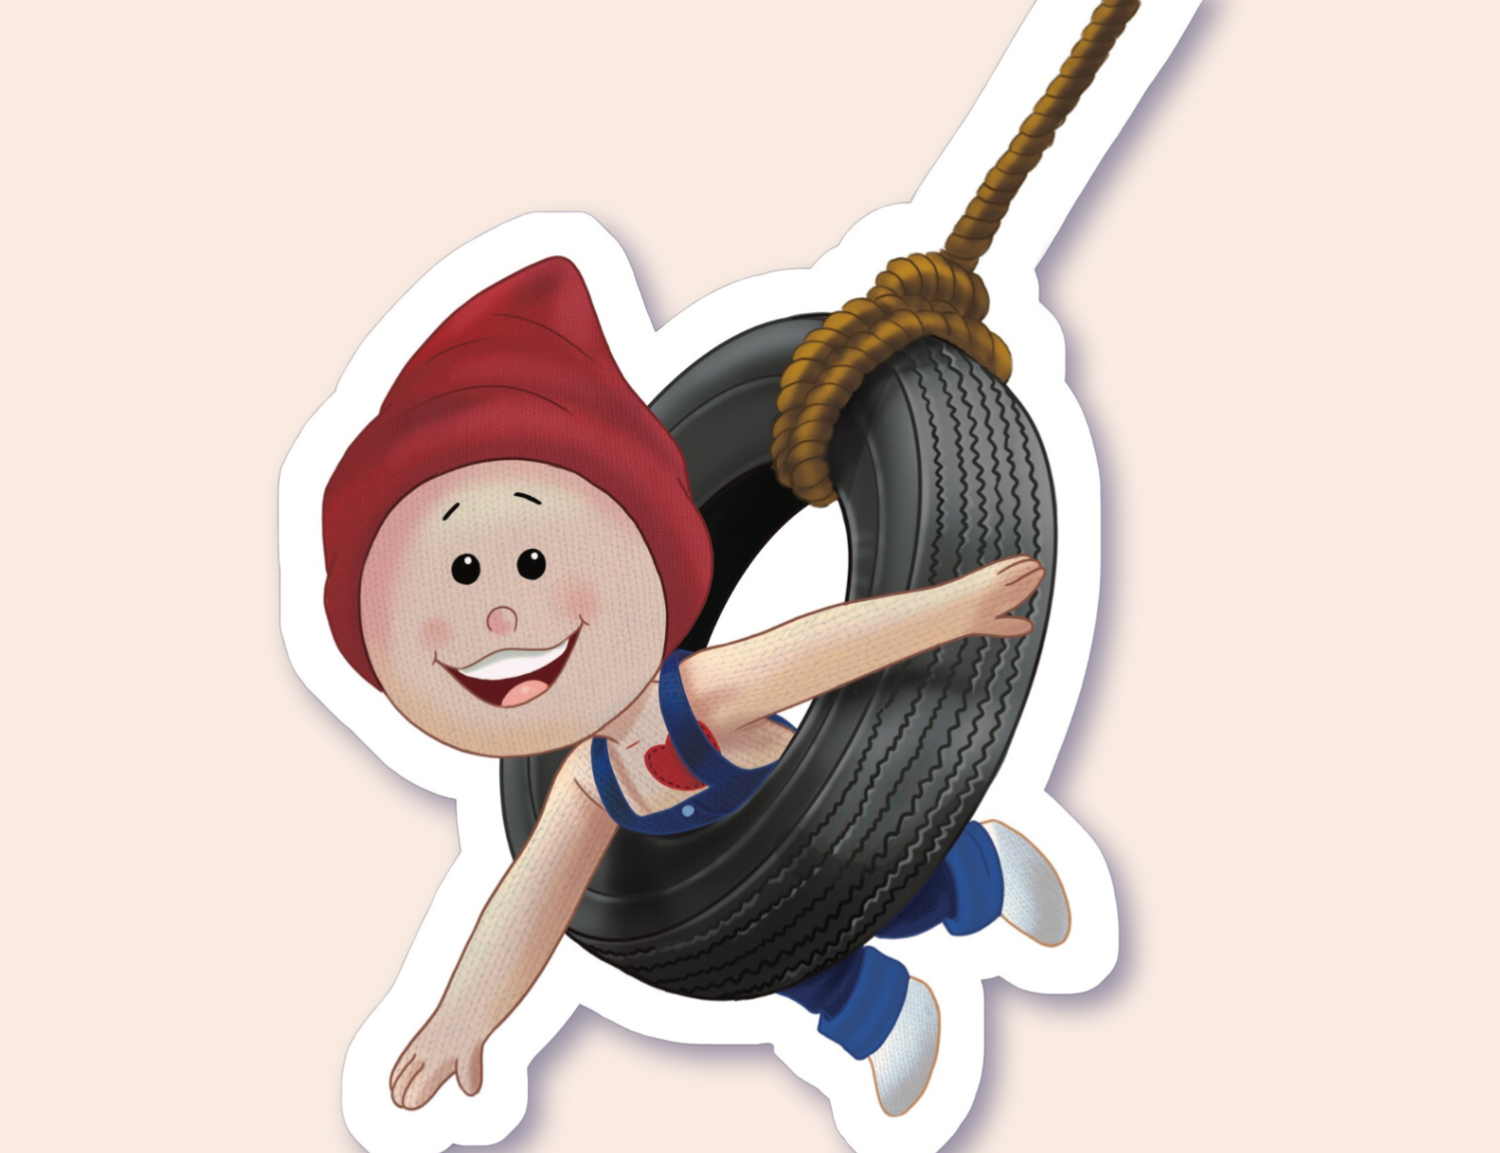 A sticker of a joyful gnome character wearing a red hat, swinging happily on a black tire swing, which is attached to a brown rope.